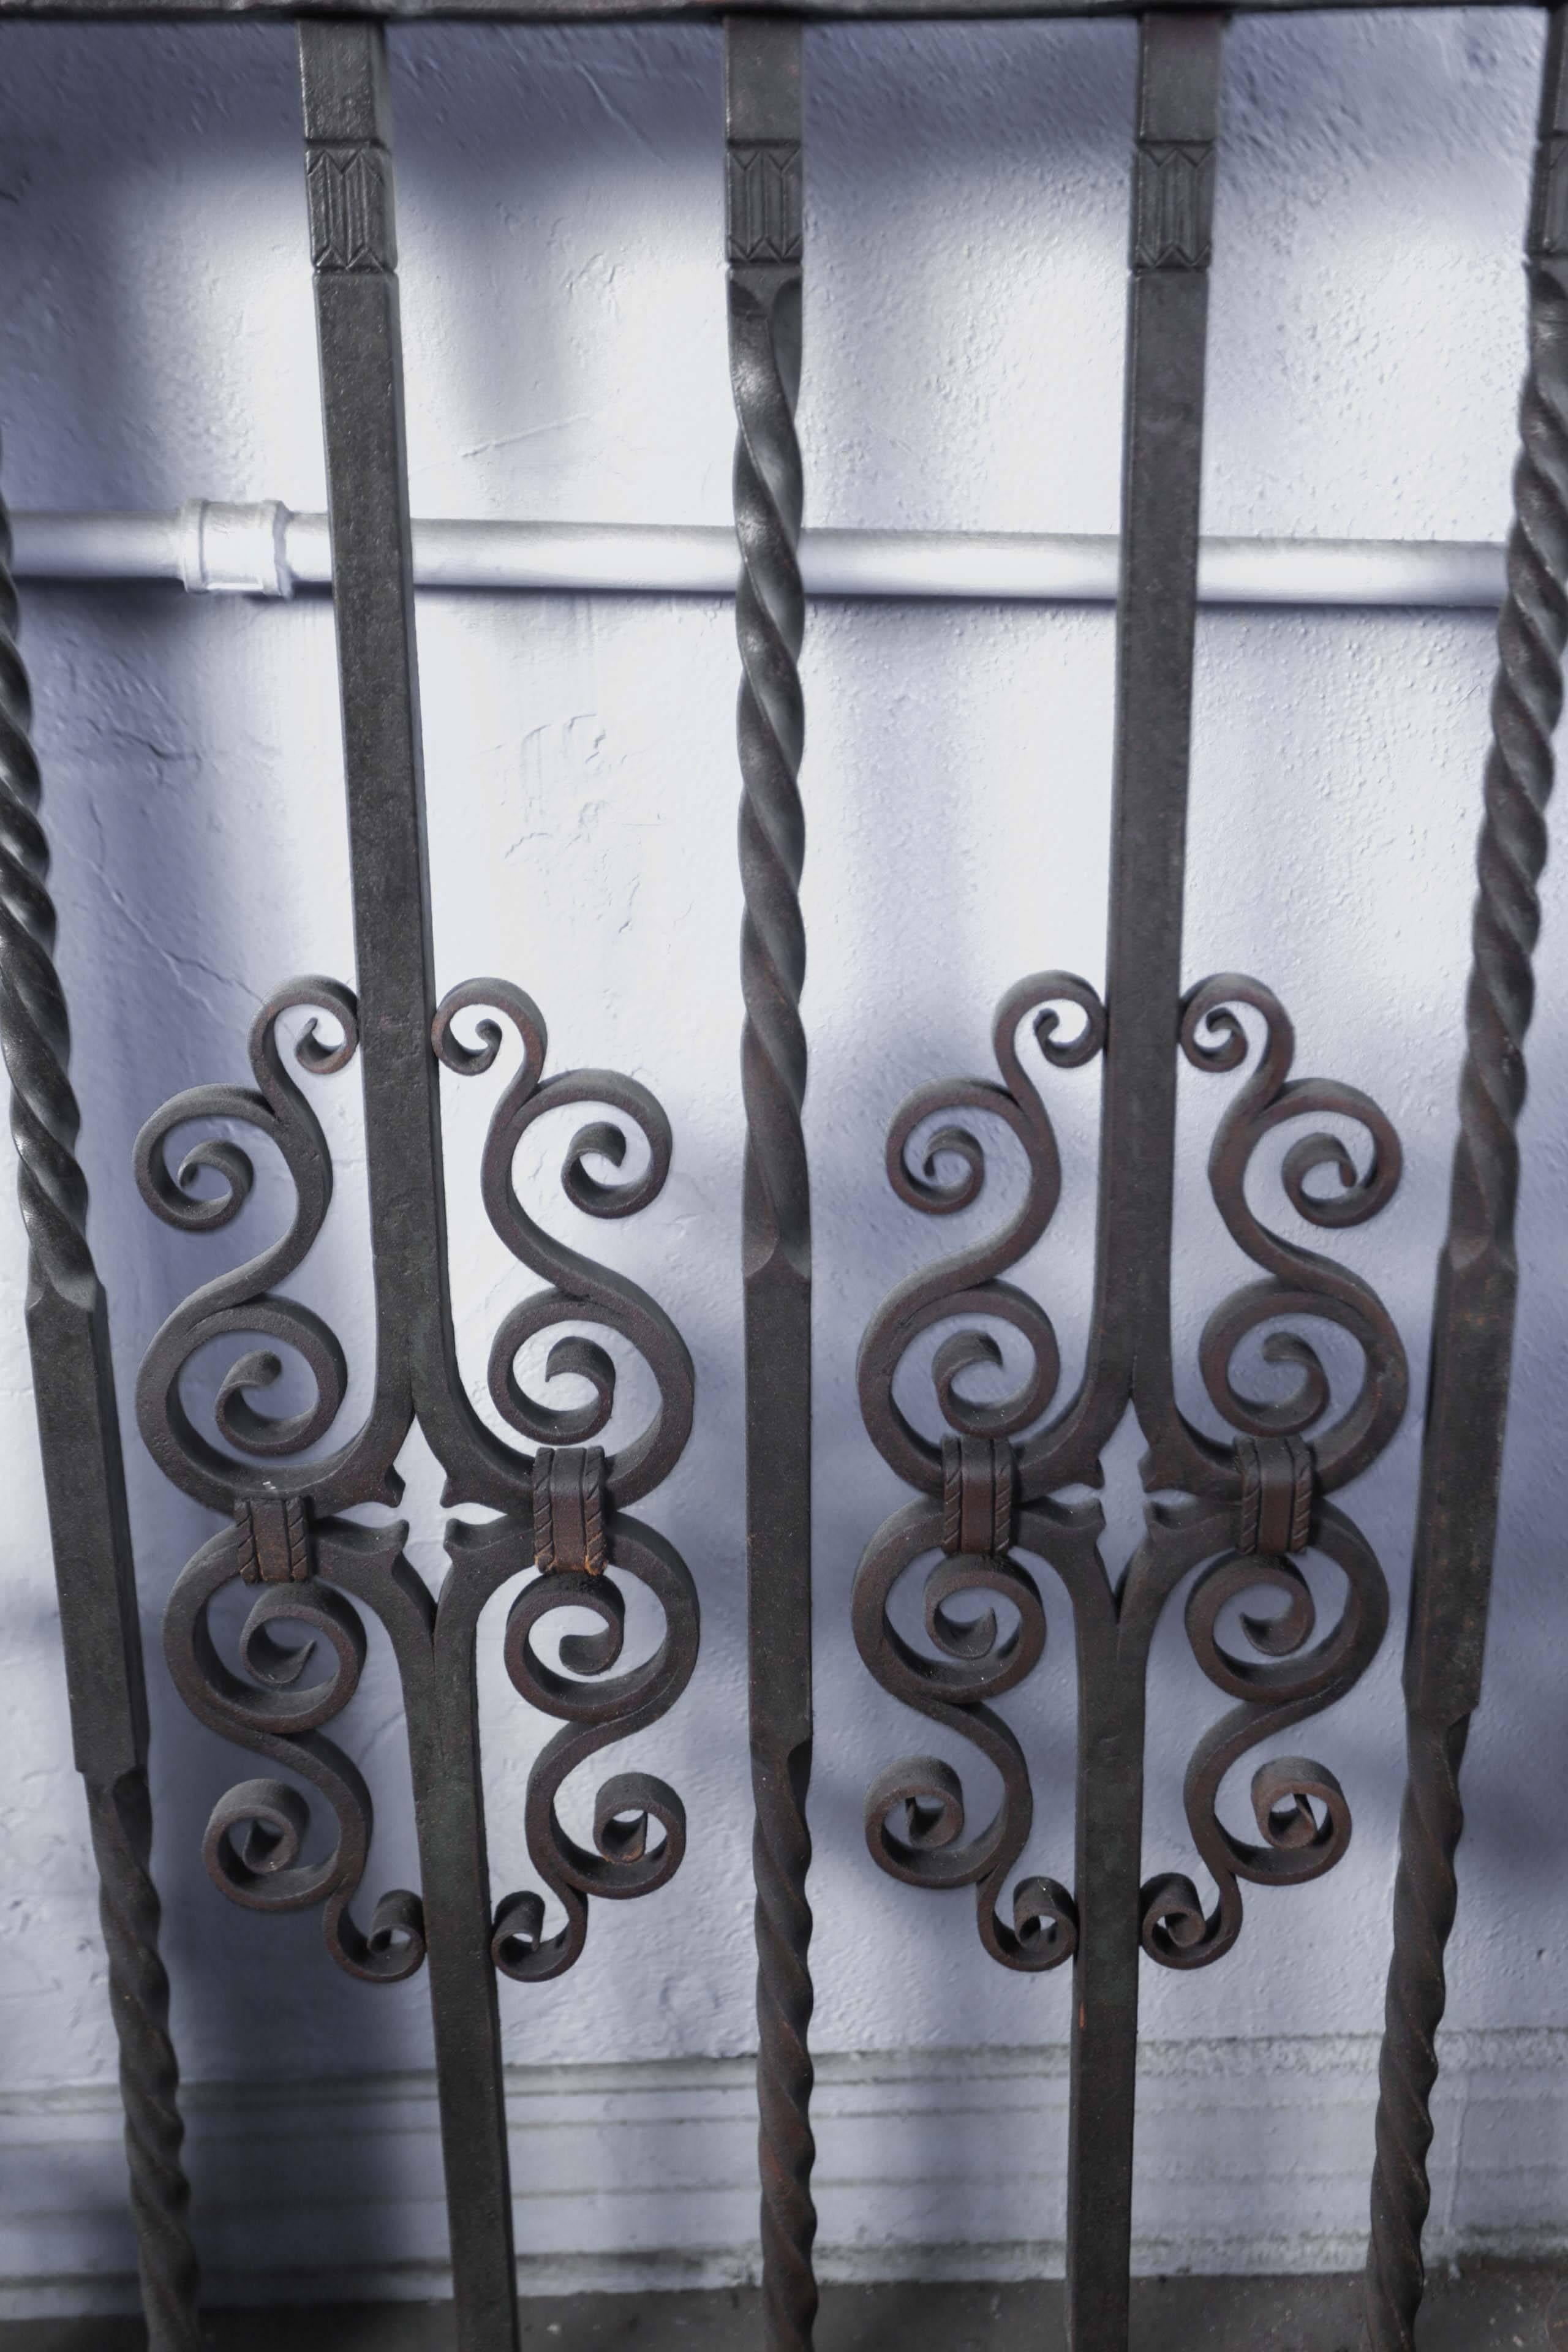 American 1910 Pair Wrought Iron Gates by Samuel Yellin with Cat Motif from Philadelphia